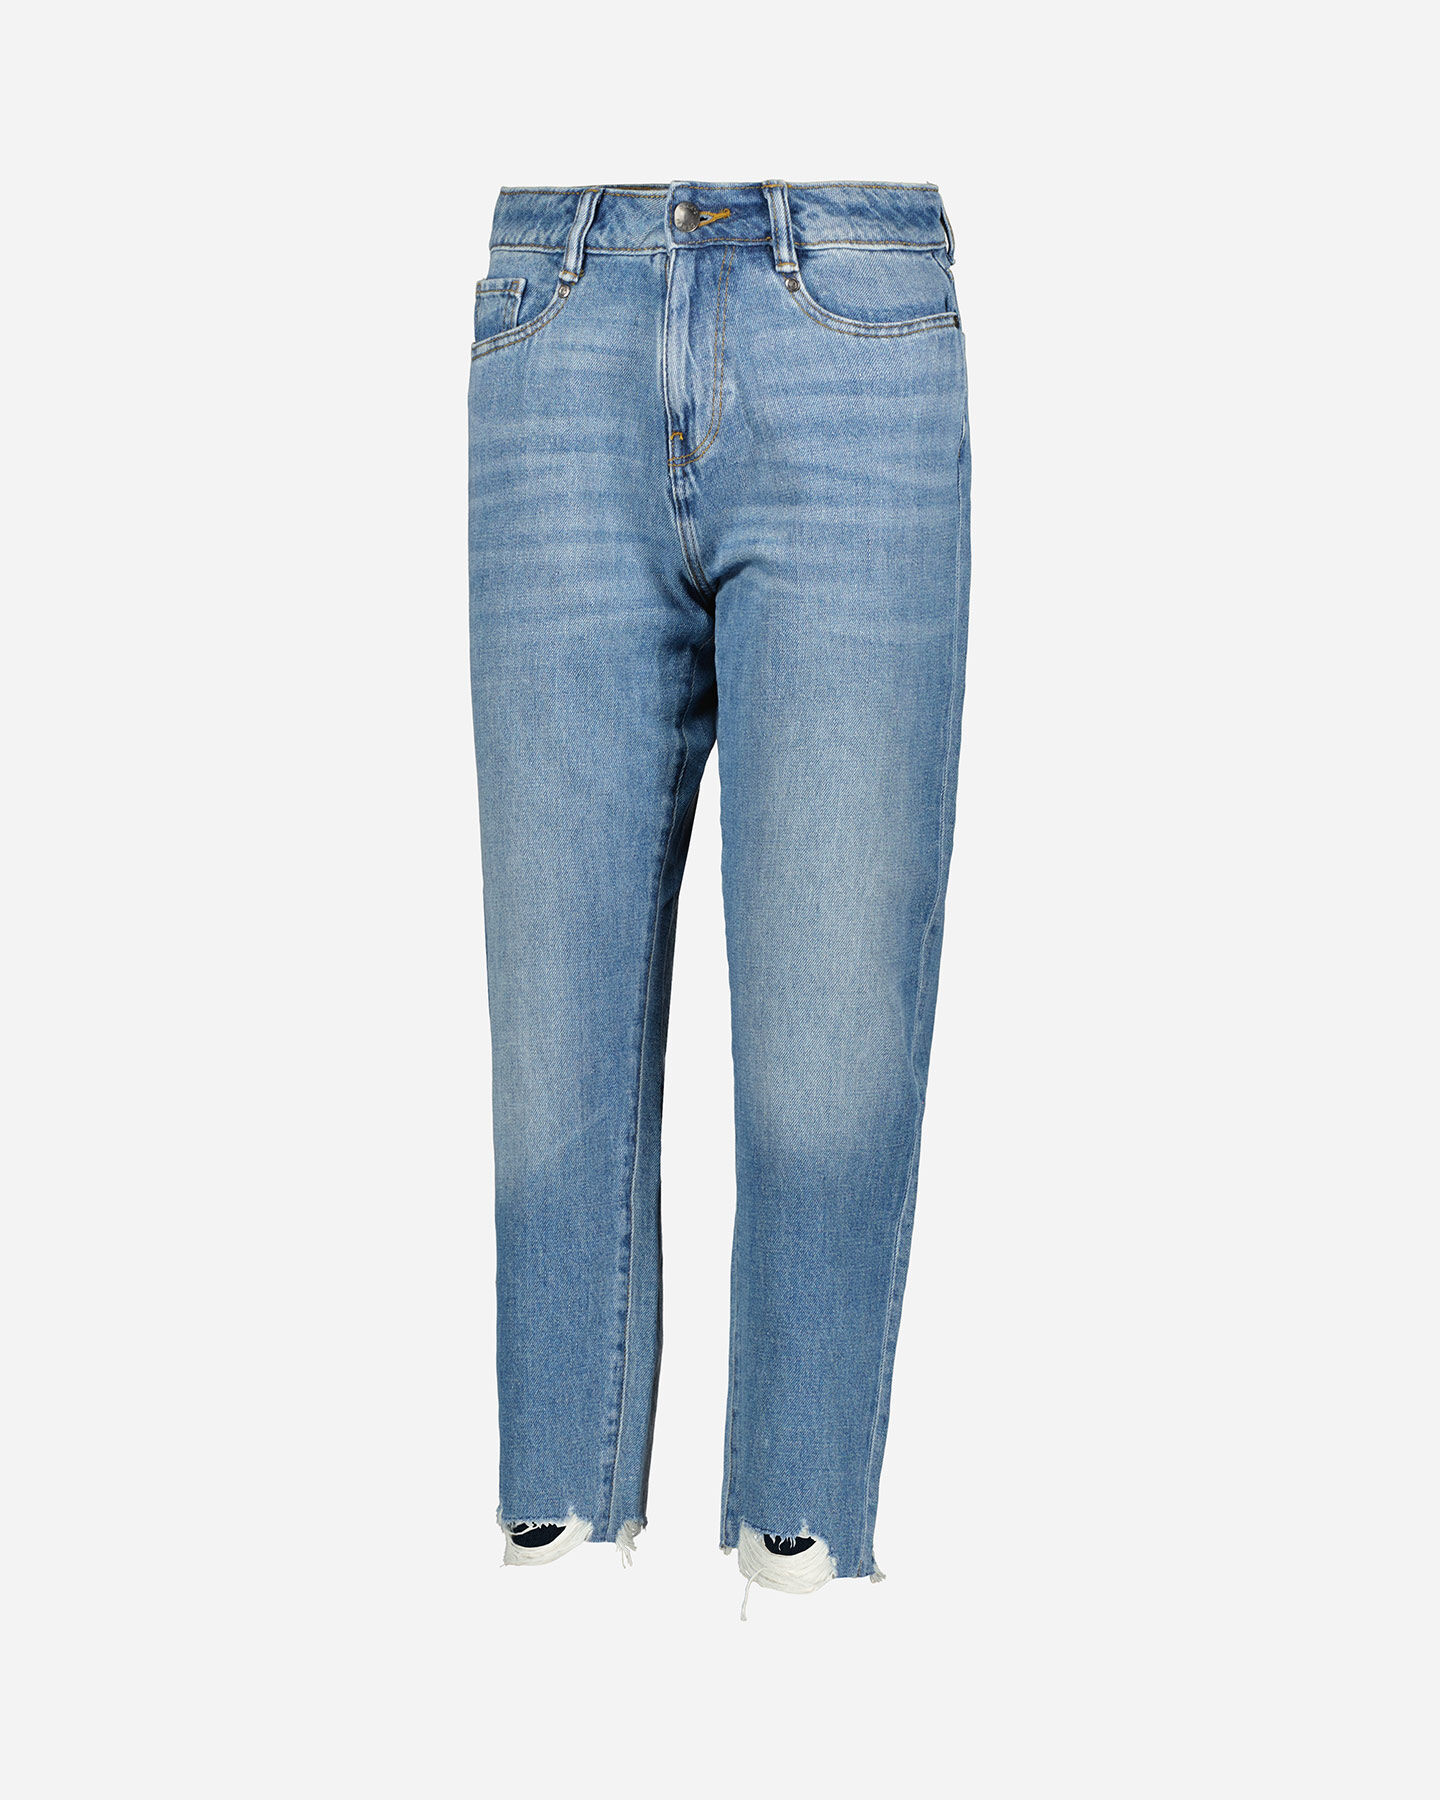  Jeans DACK'S DENIM PROJECT W S4118480|MD|44 scatto 4